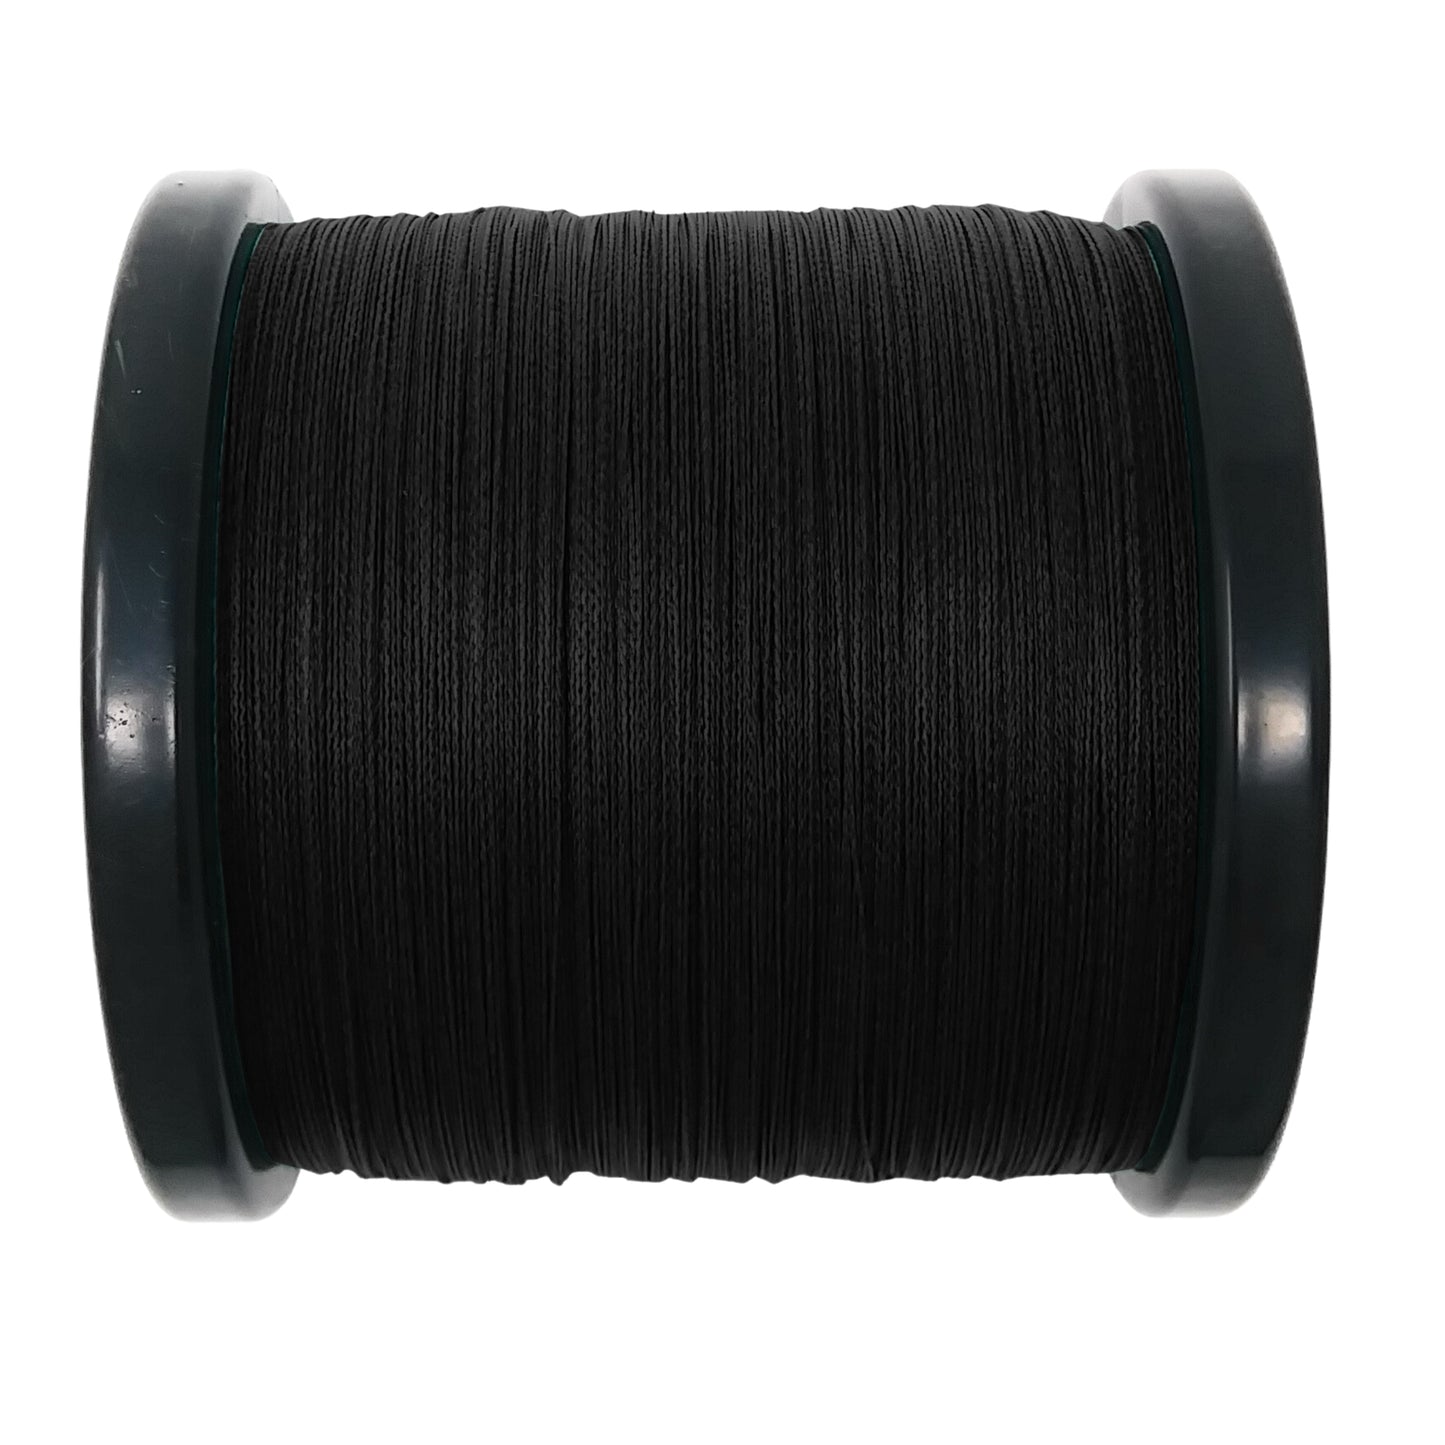 Reaction Tackle Braided Fishing Line- NEW NO FADE Black